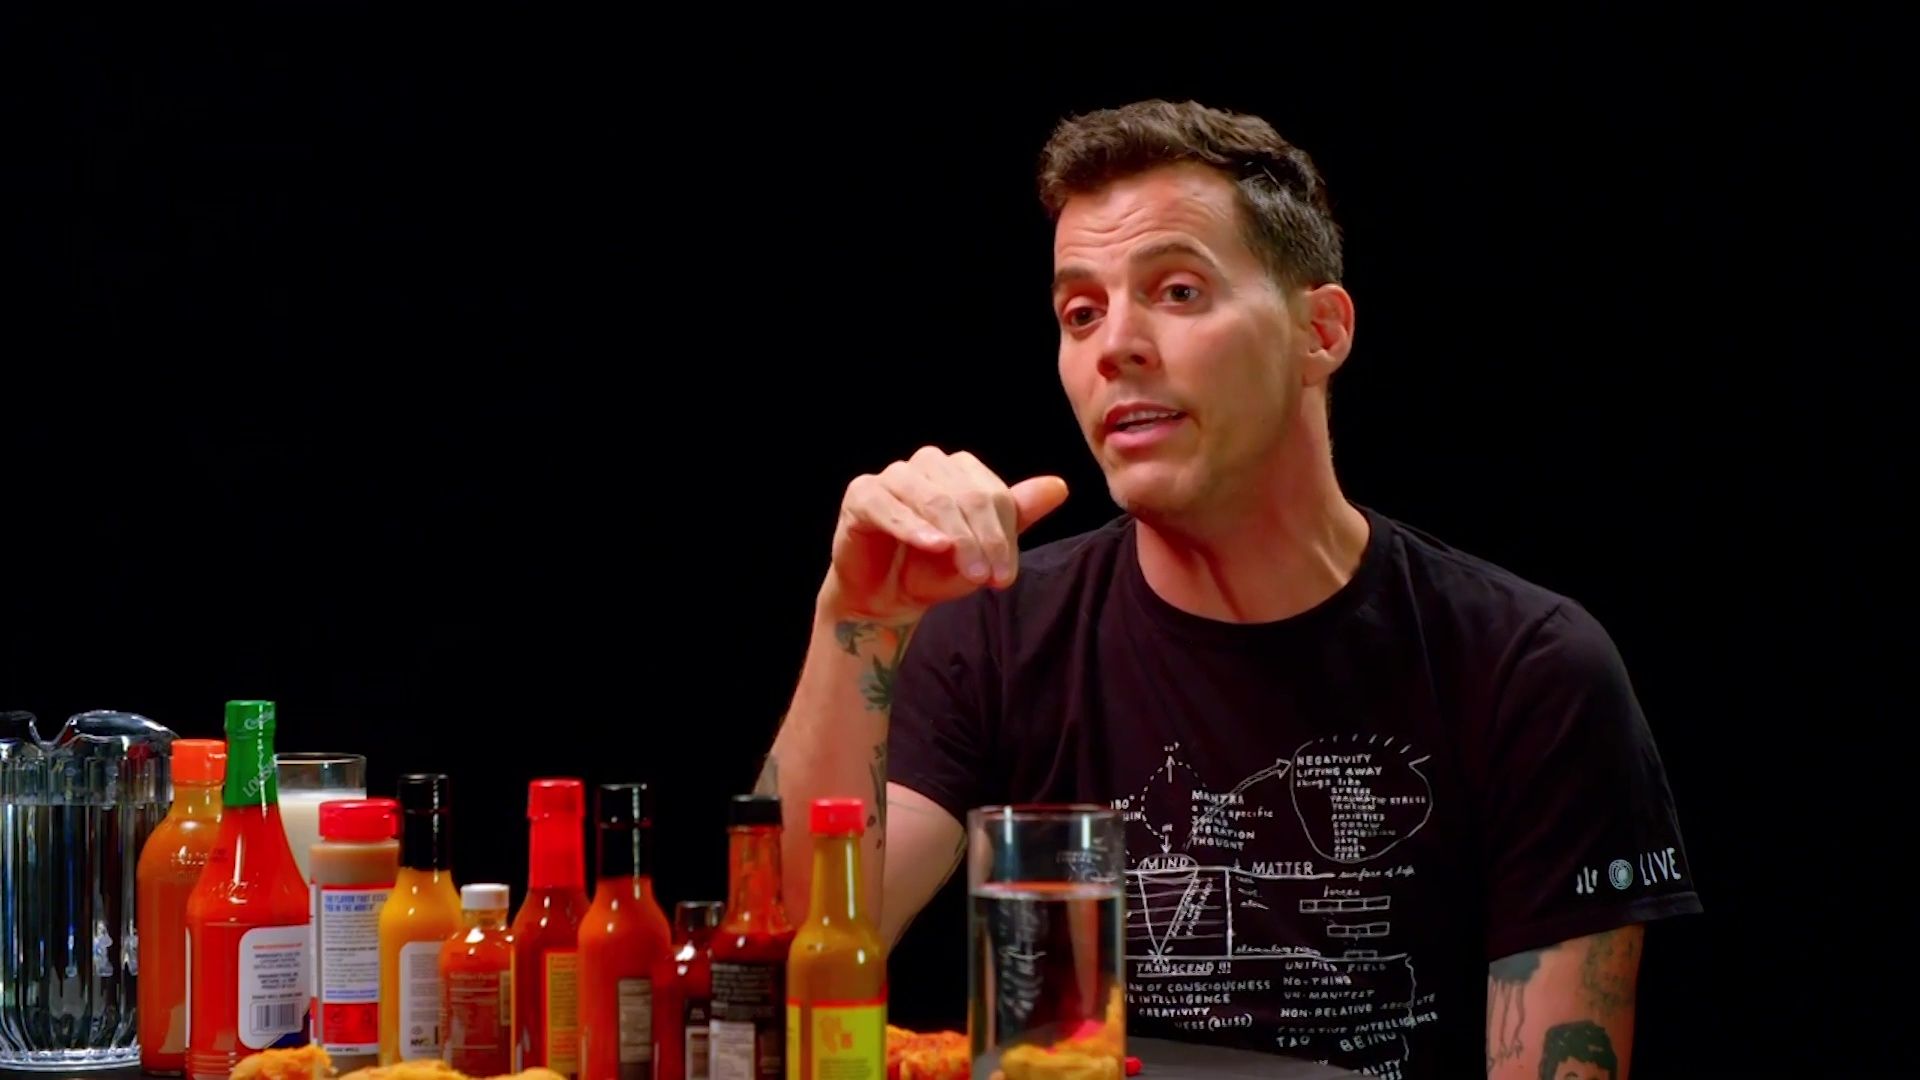 Steve-O Tells Insane Stories While Eating Spicy Wings